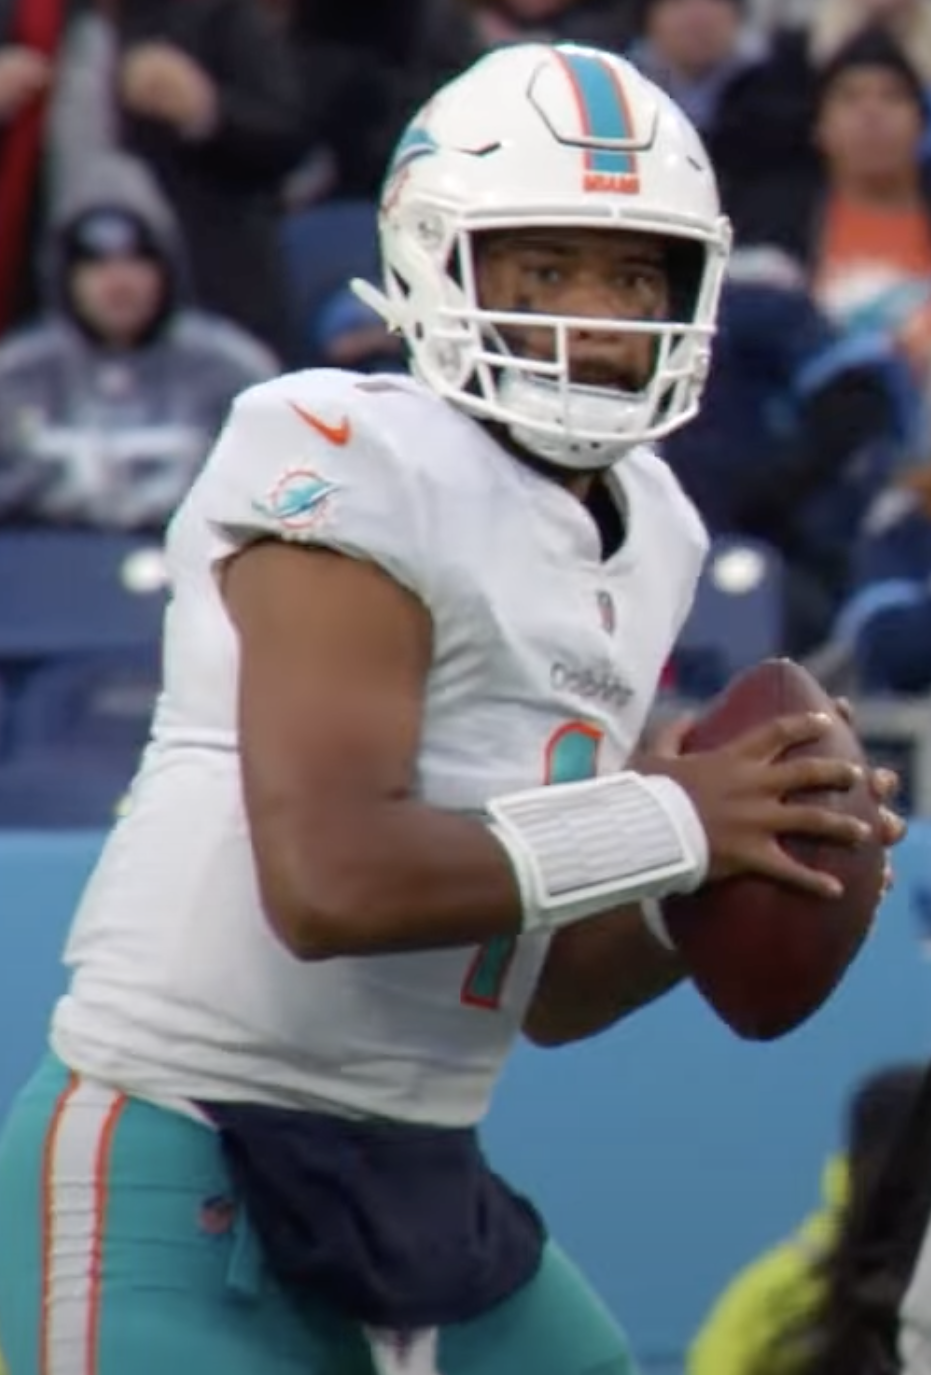 Tua Tagovailoa of the Dolphins’ injury raises questions about the NFL’s concussion policies.￼